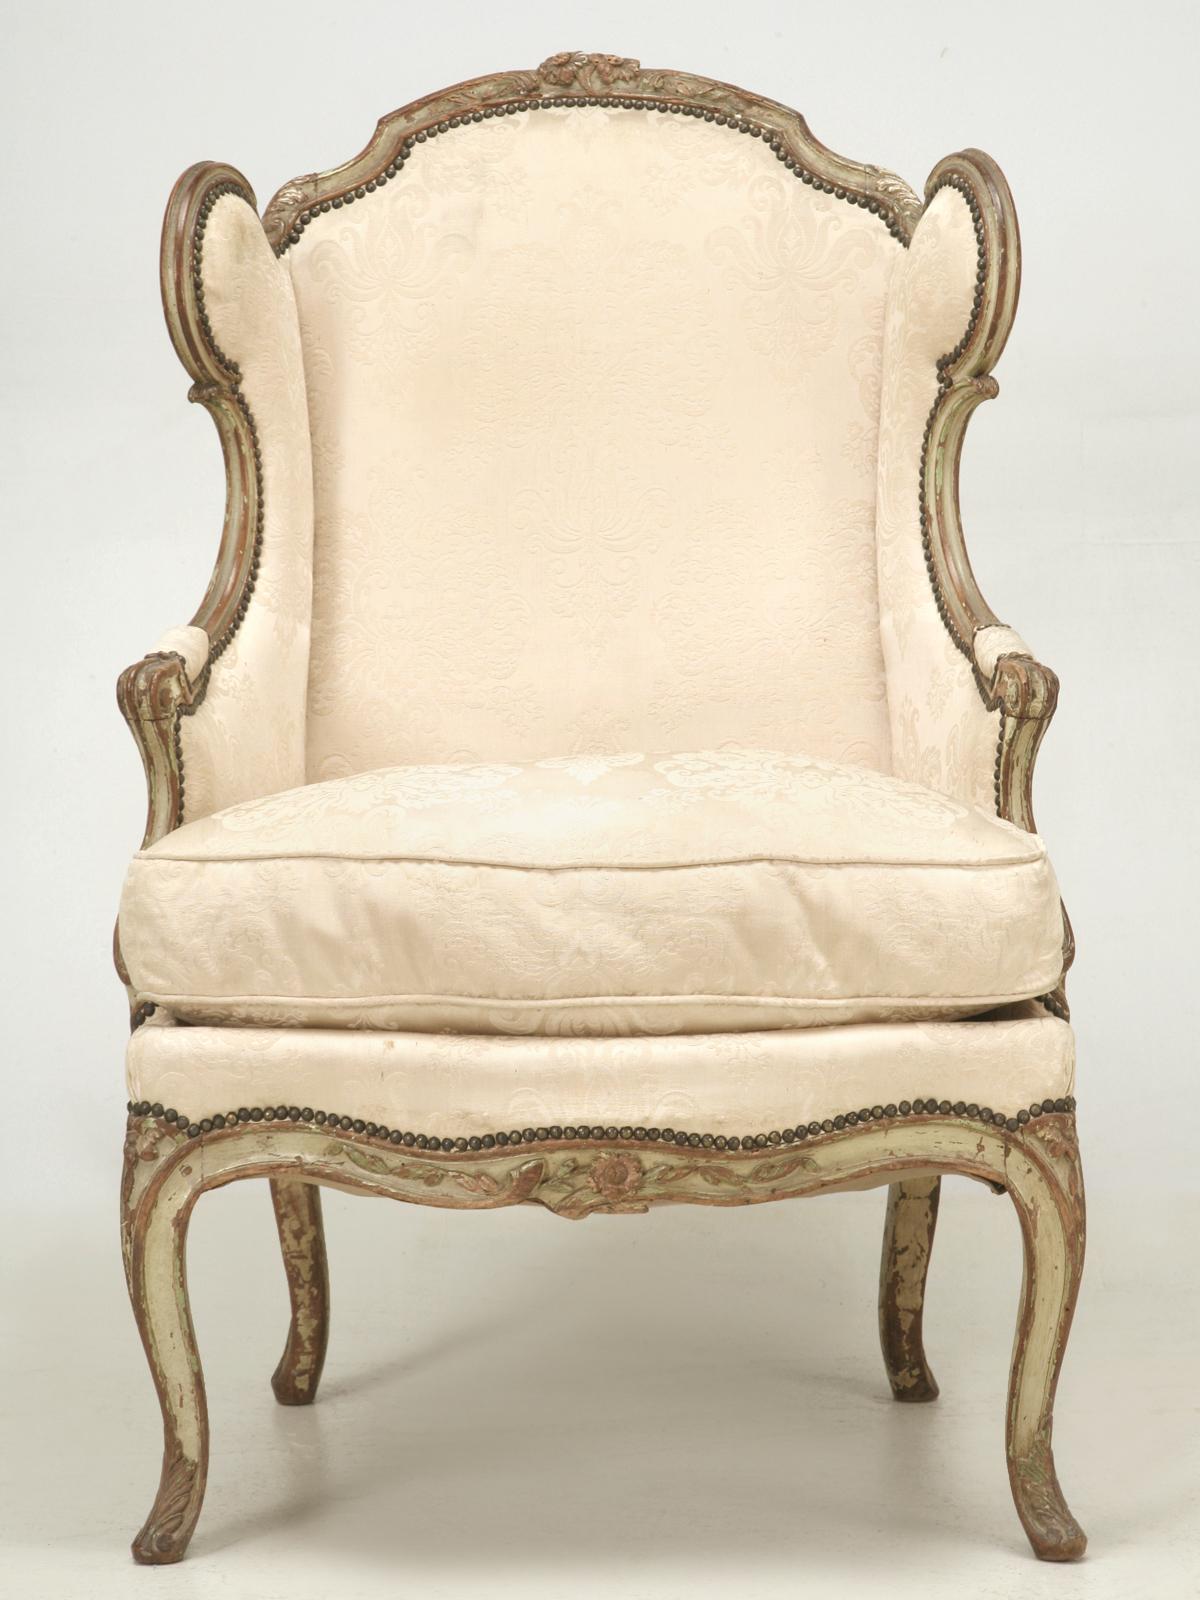 bergere chair definition